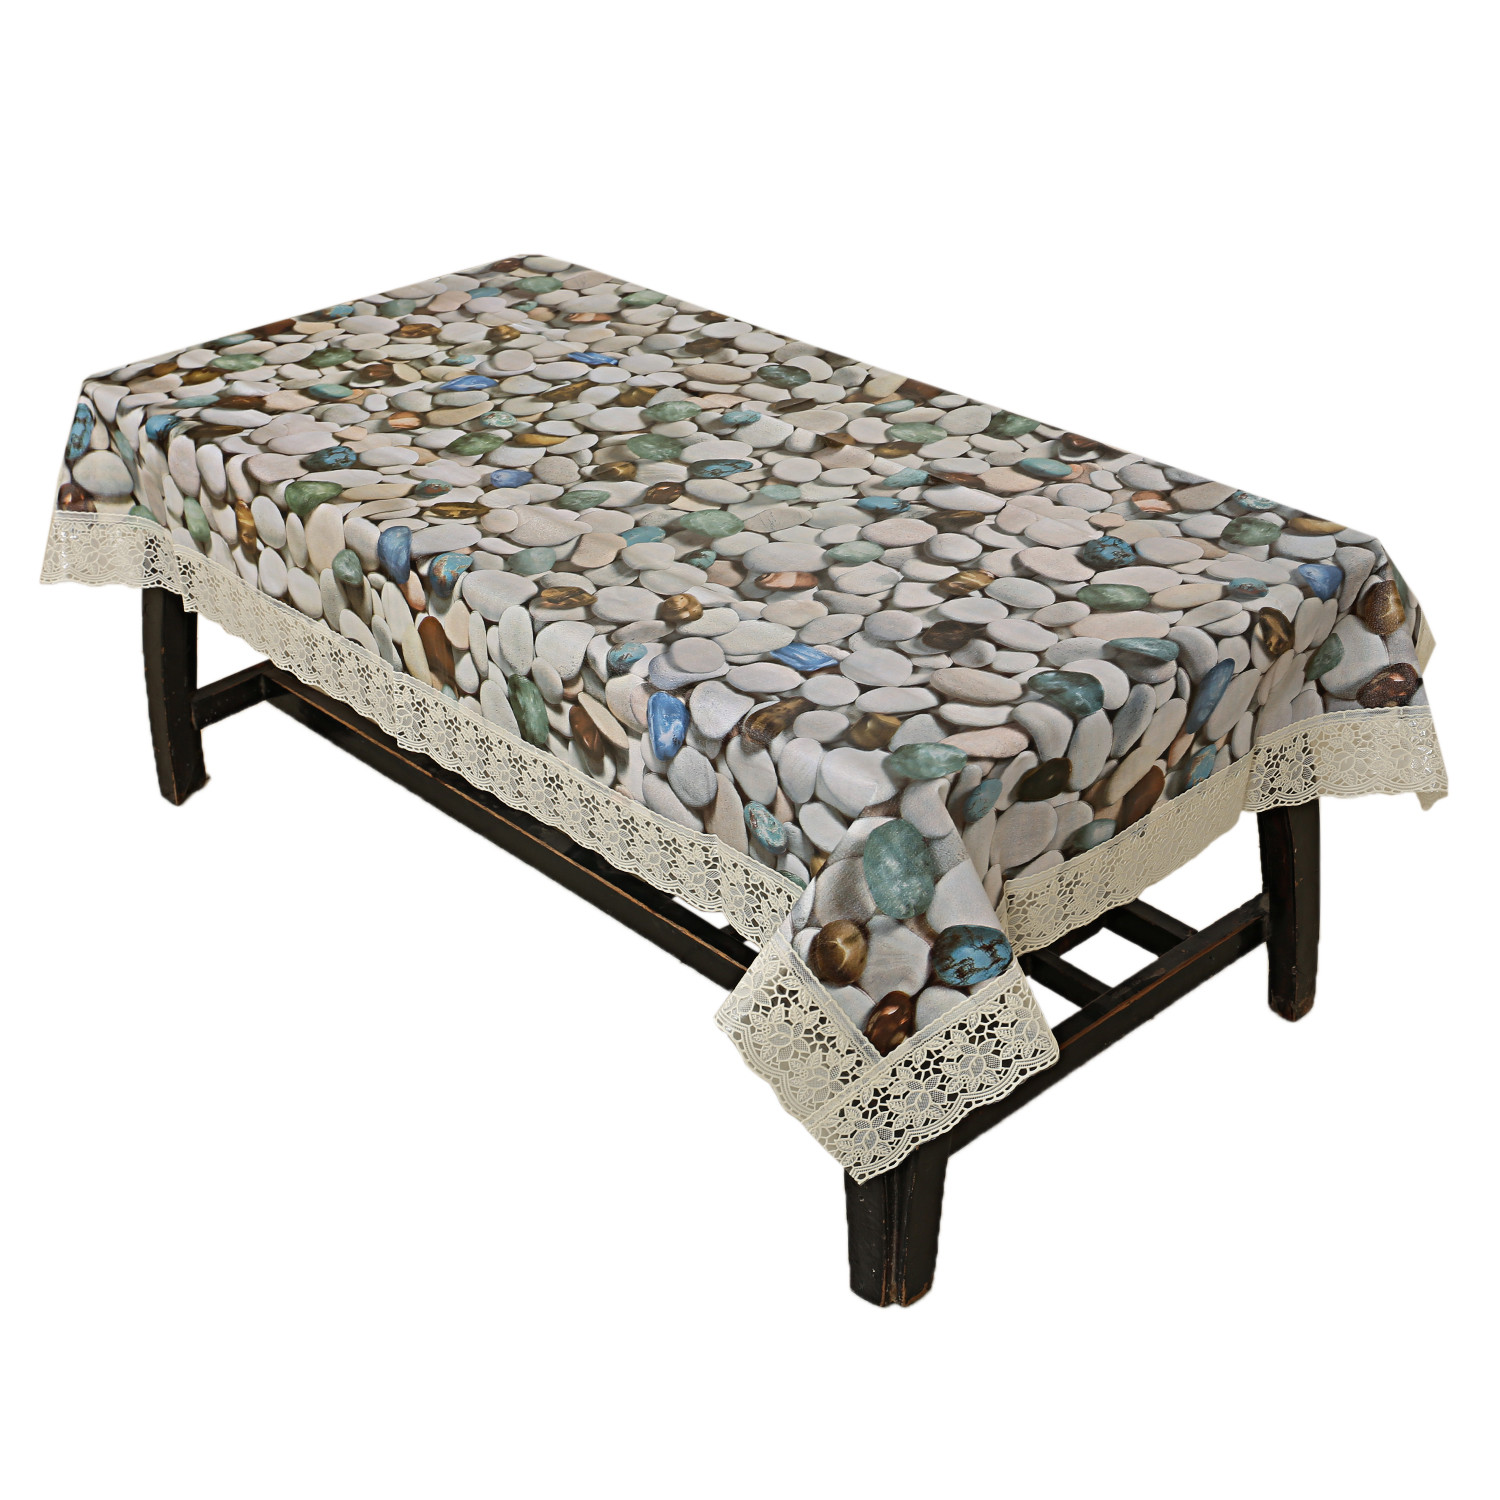 Kuber Industries Dining Table Cover Tablecloth Waterproof Protector 6 Seater With Stone Printed, 60 X 90 Inches Rectangle (Multi)